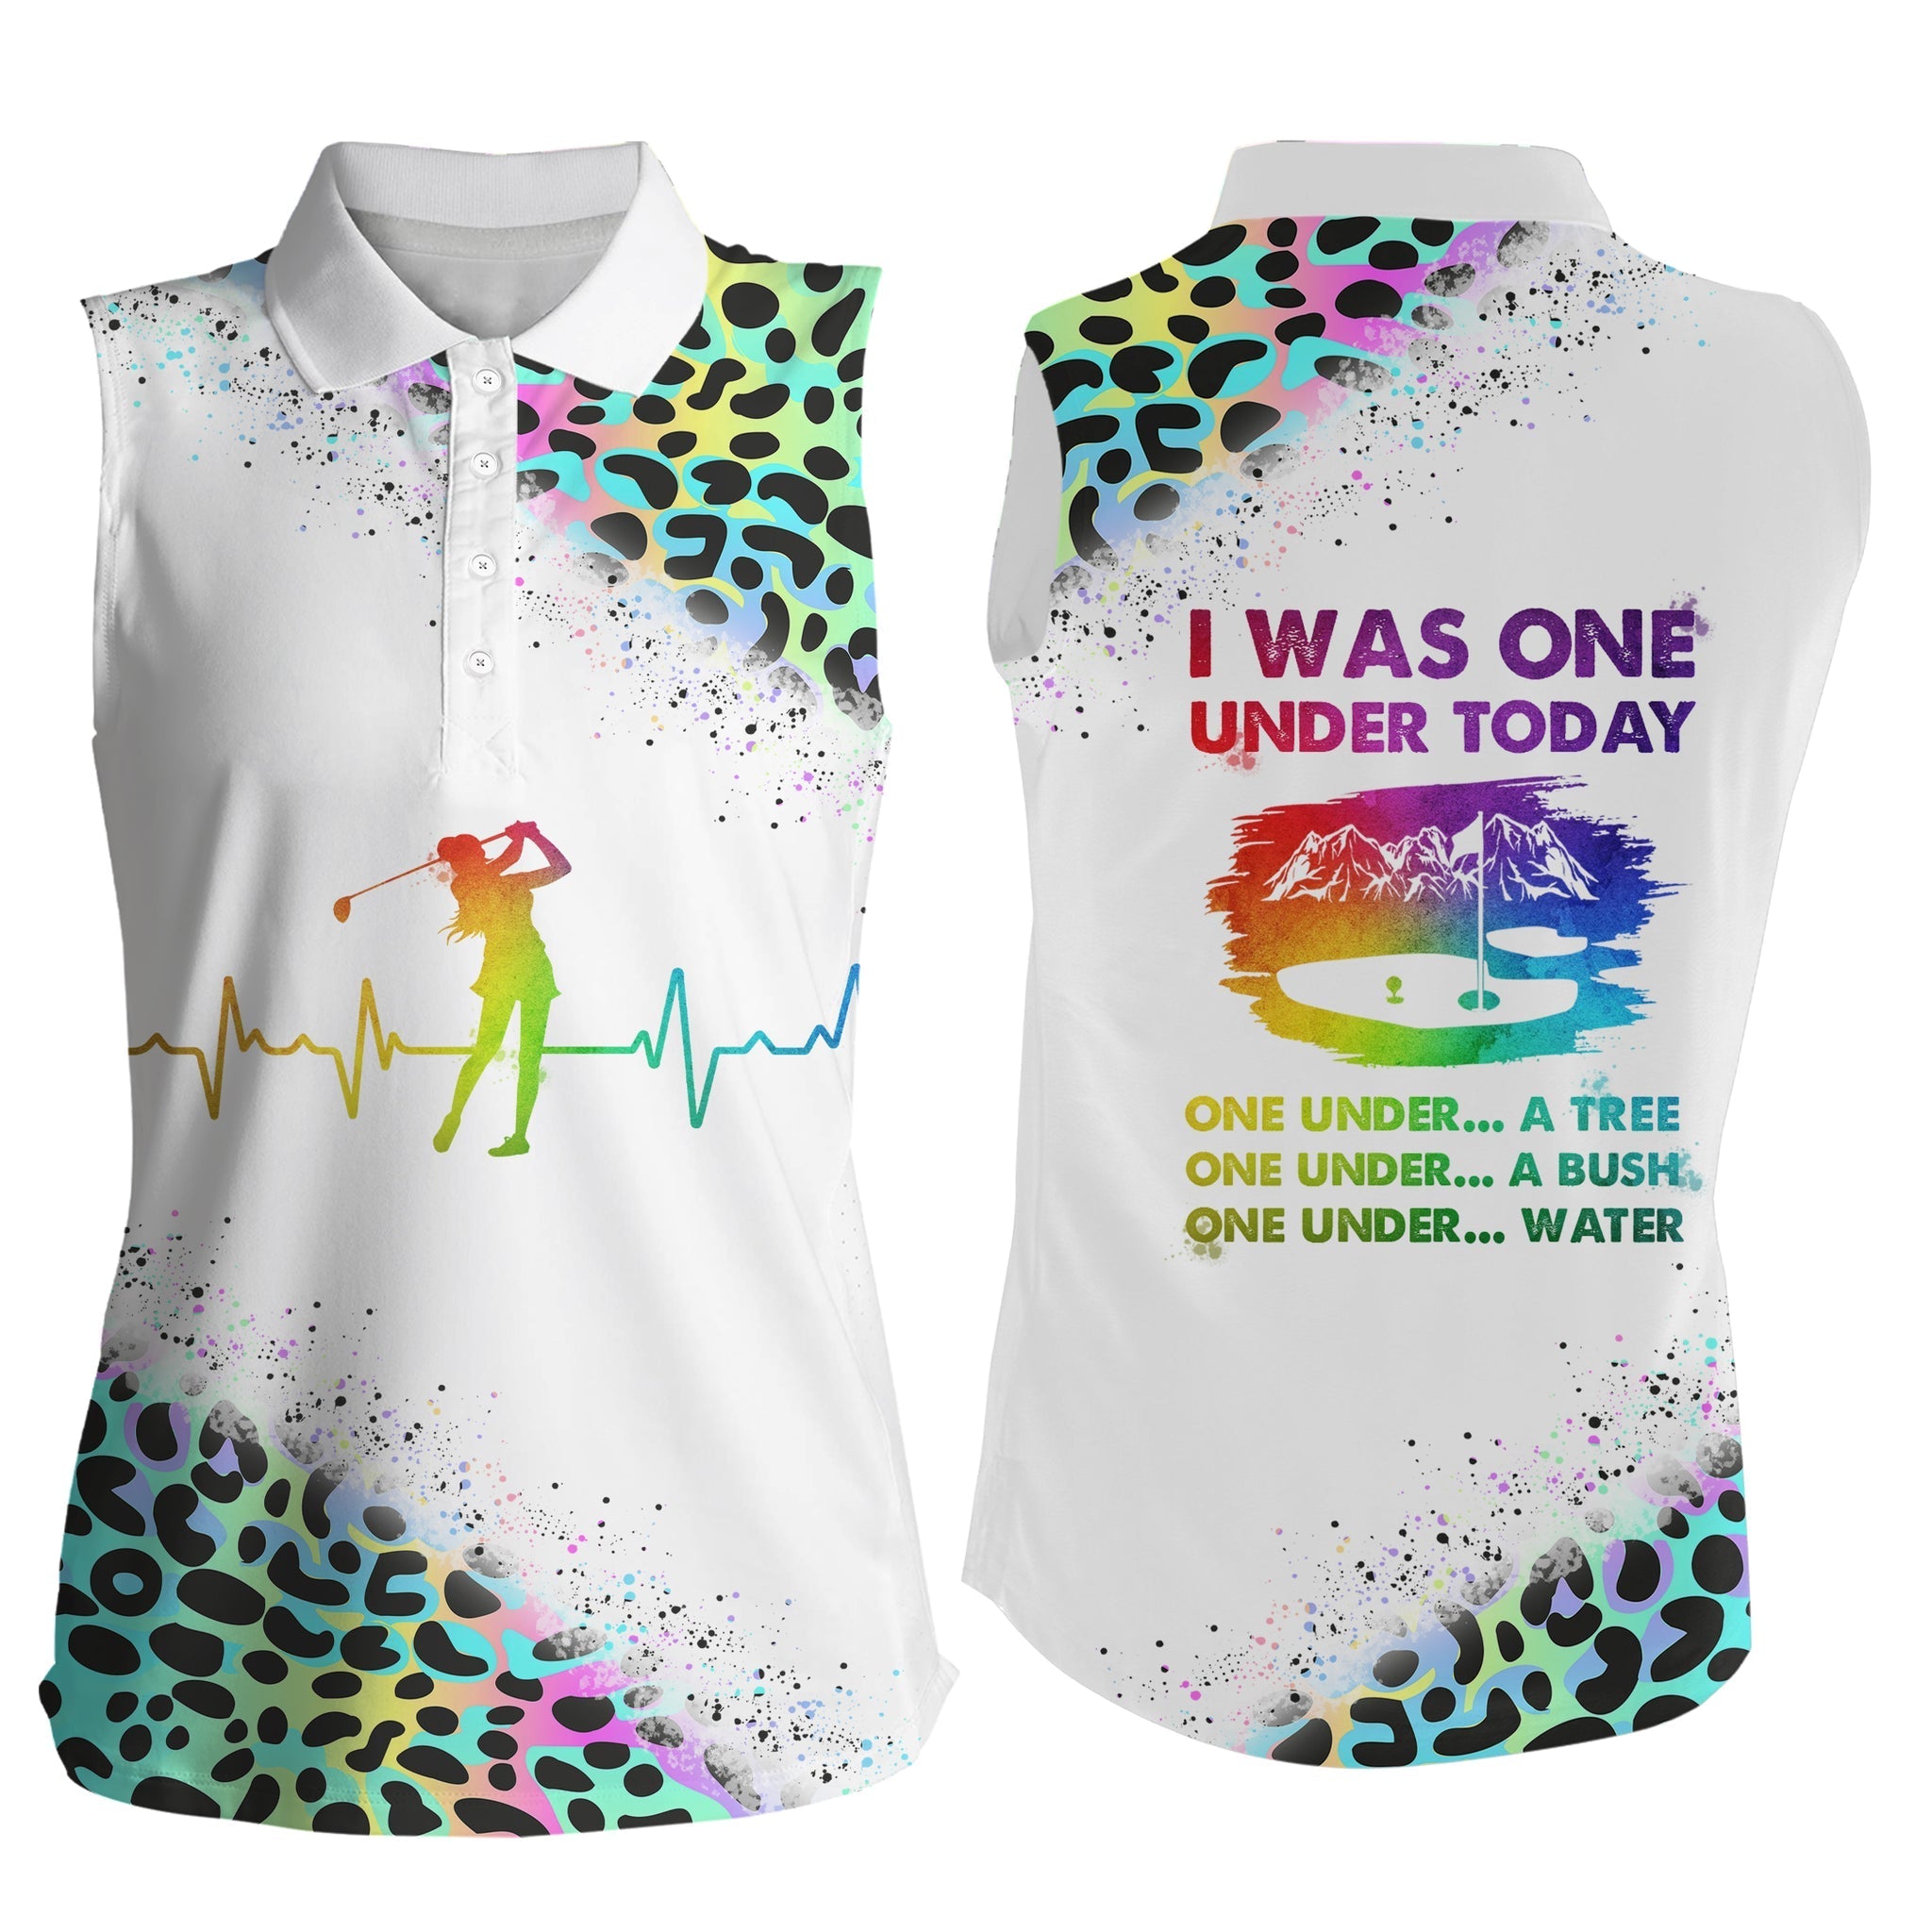 Funny Golf shirts for women/ I was one under today neon rainbow leopard women Sleeveless polo shirts